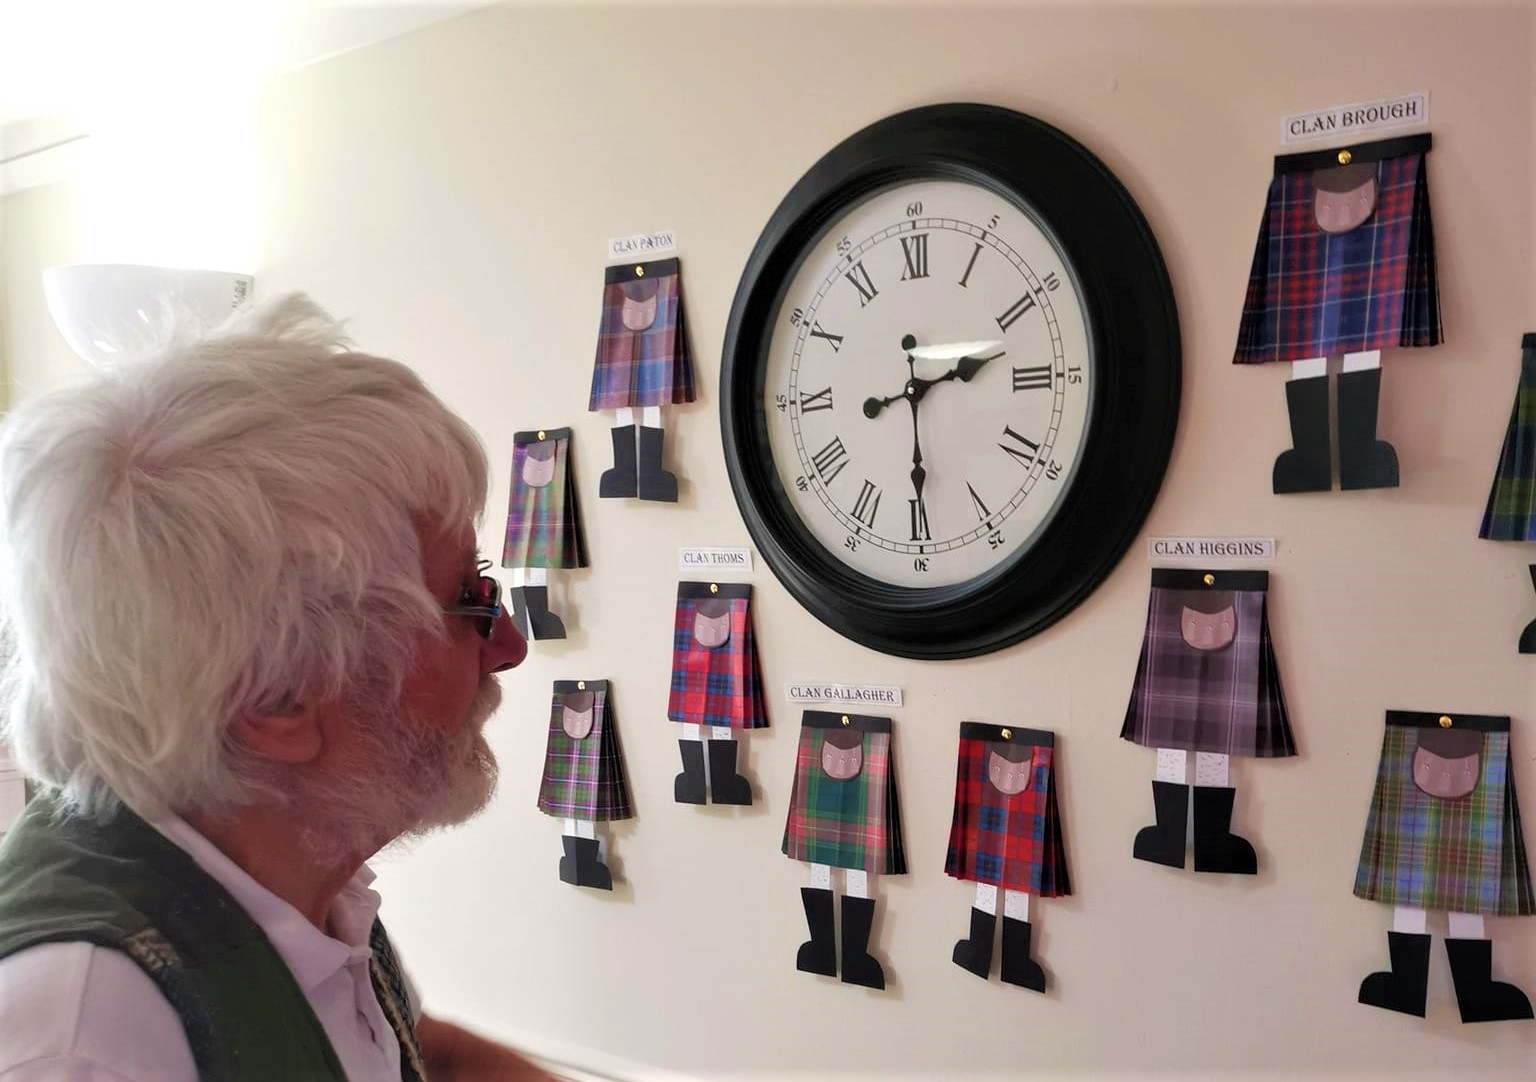 Clement Park - Hand made paper kilts on the wall